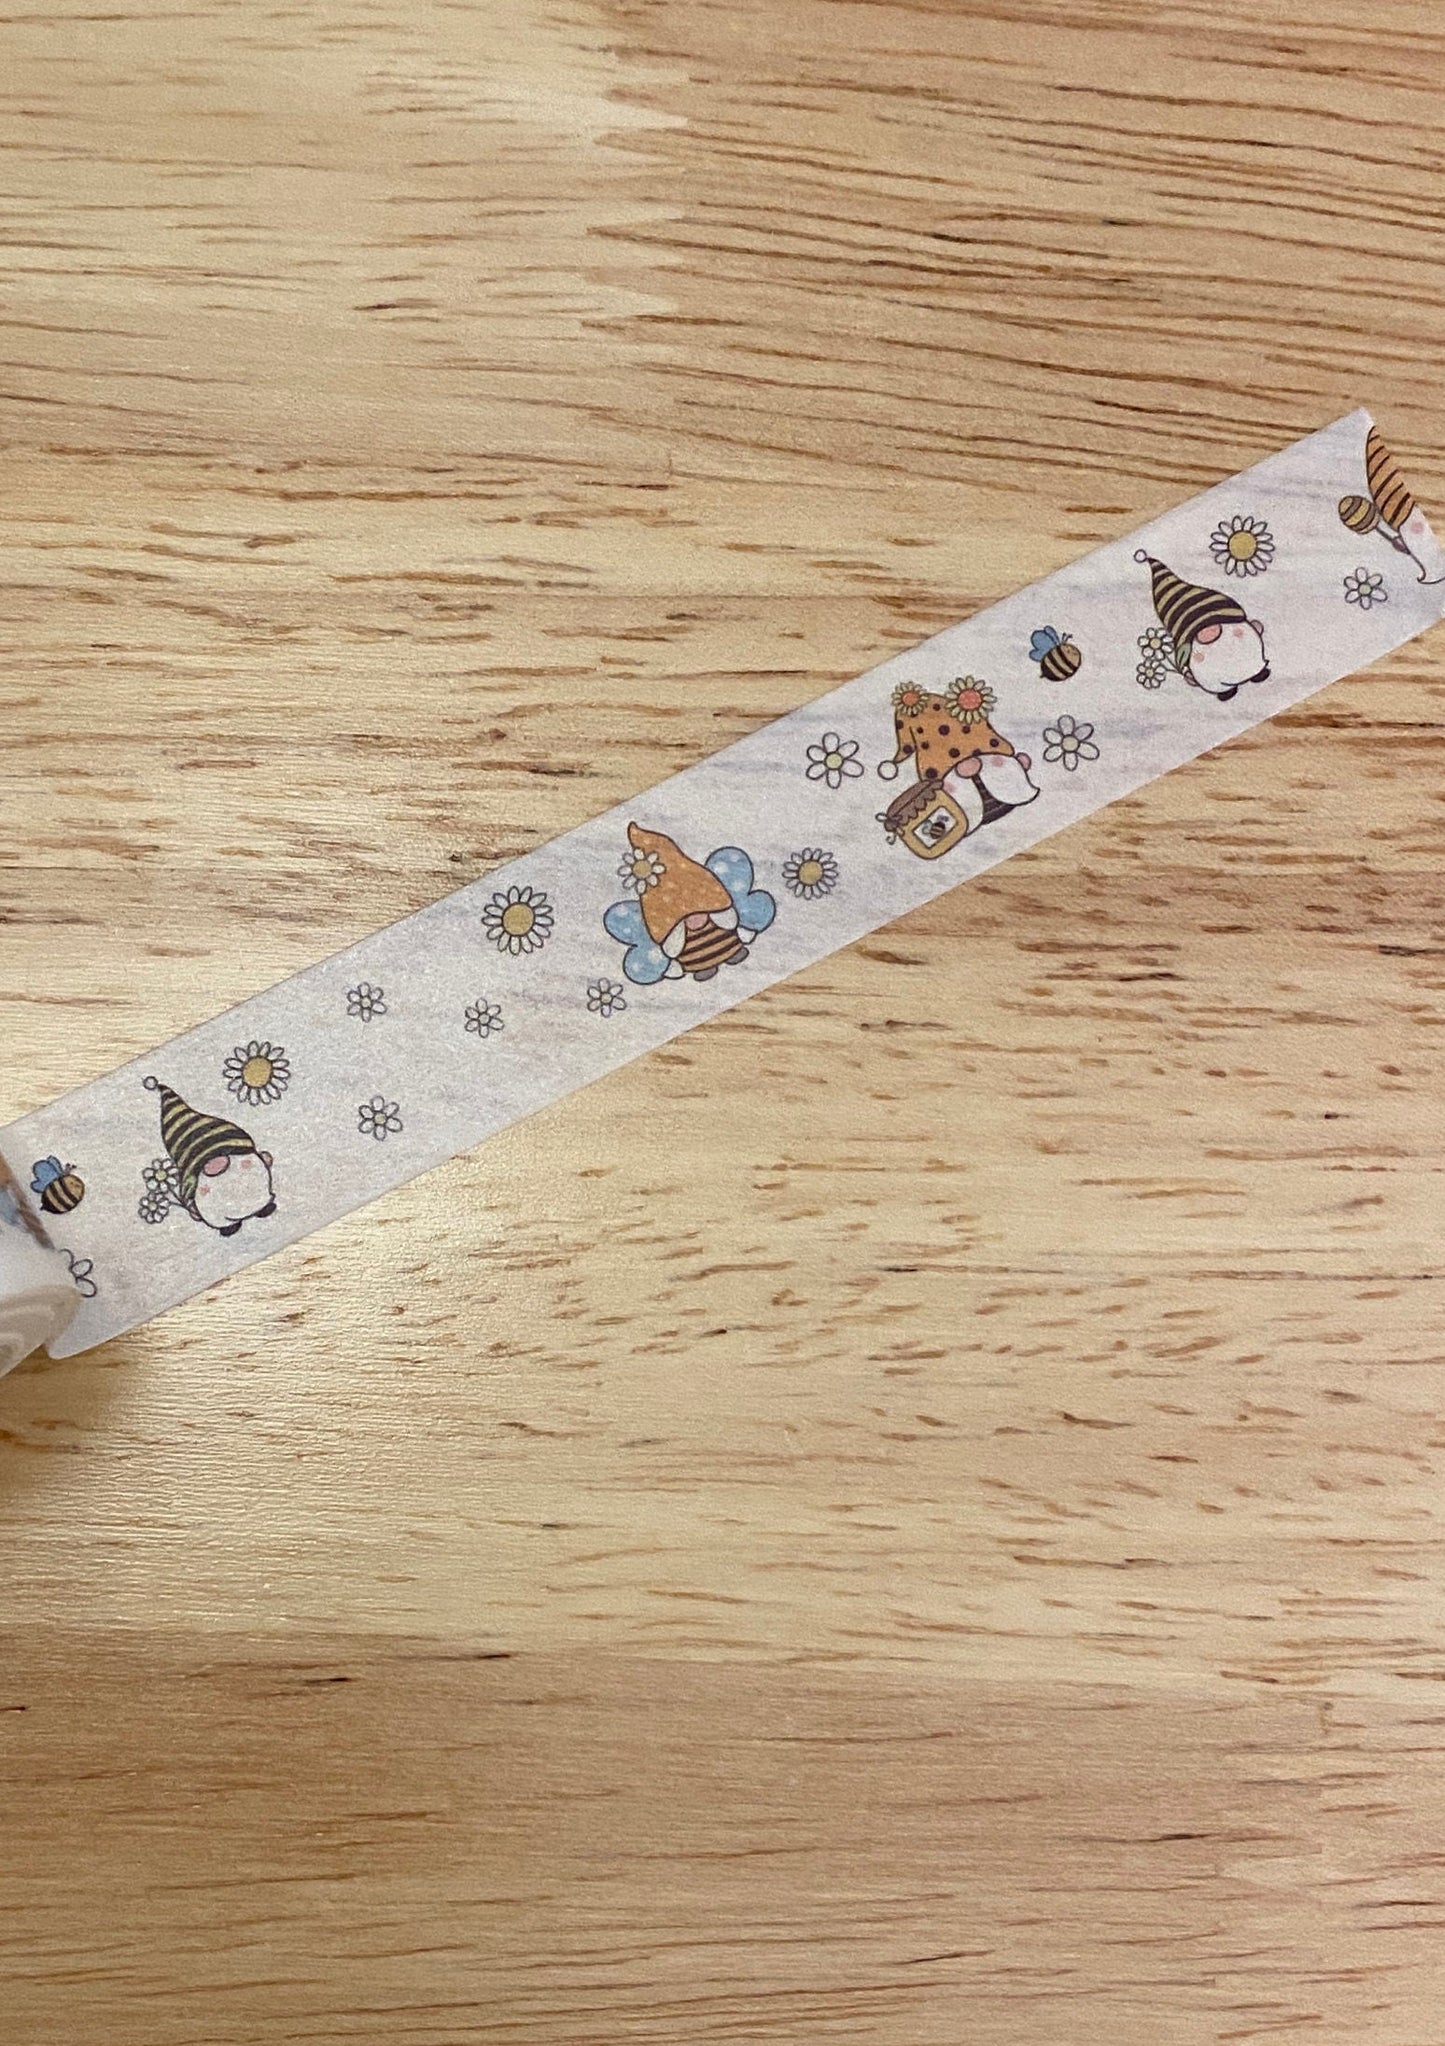 Sample Card of Bee Gnomes with Daisy Washi Tape